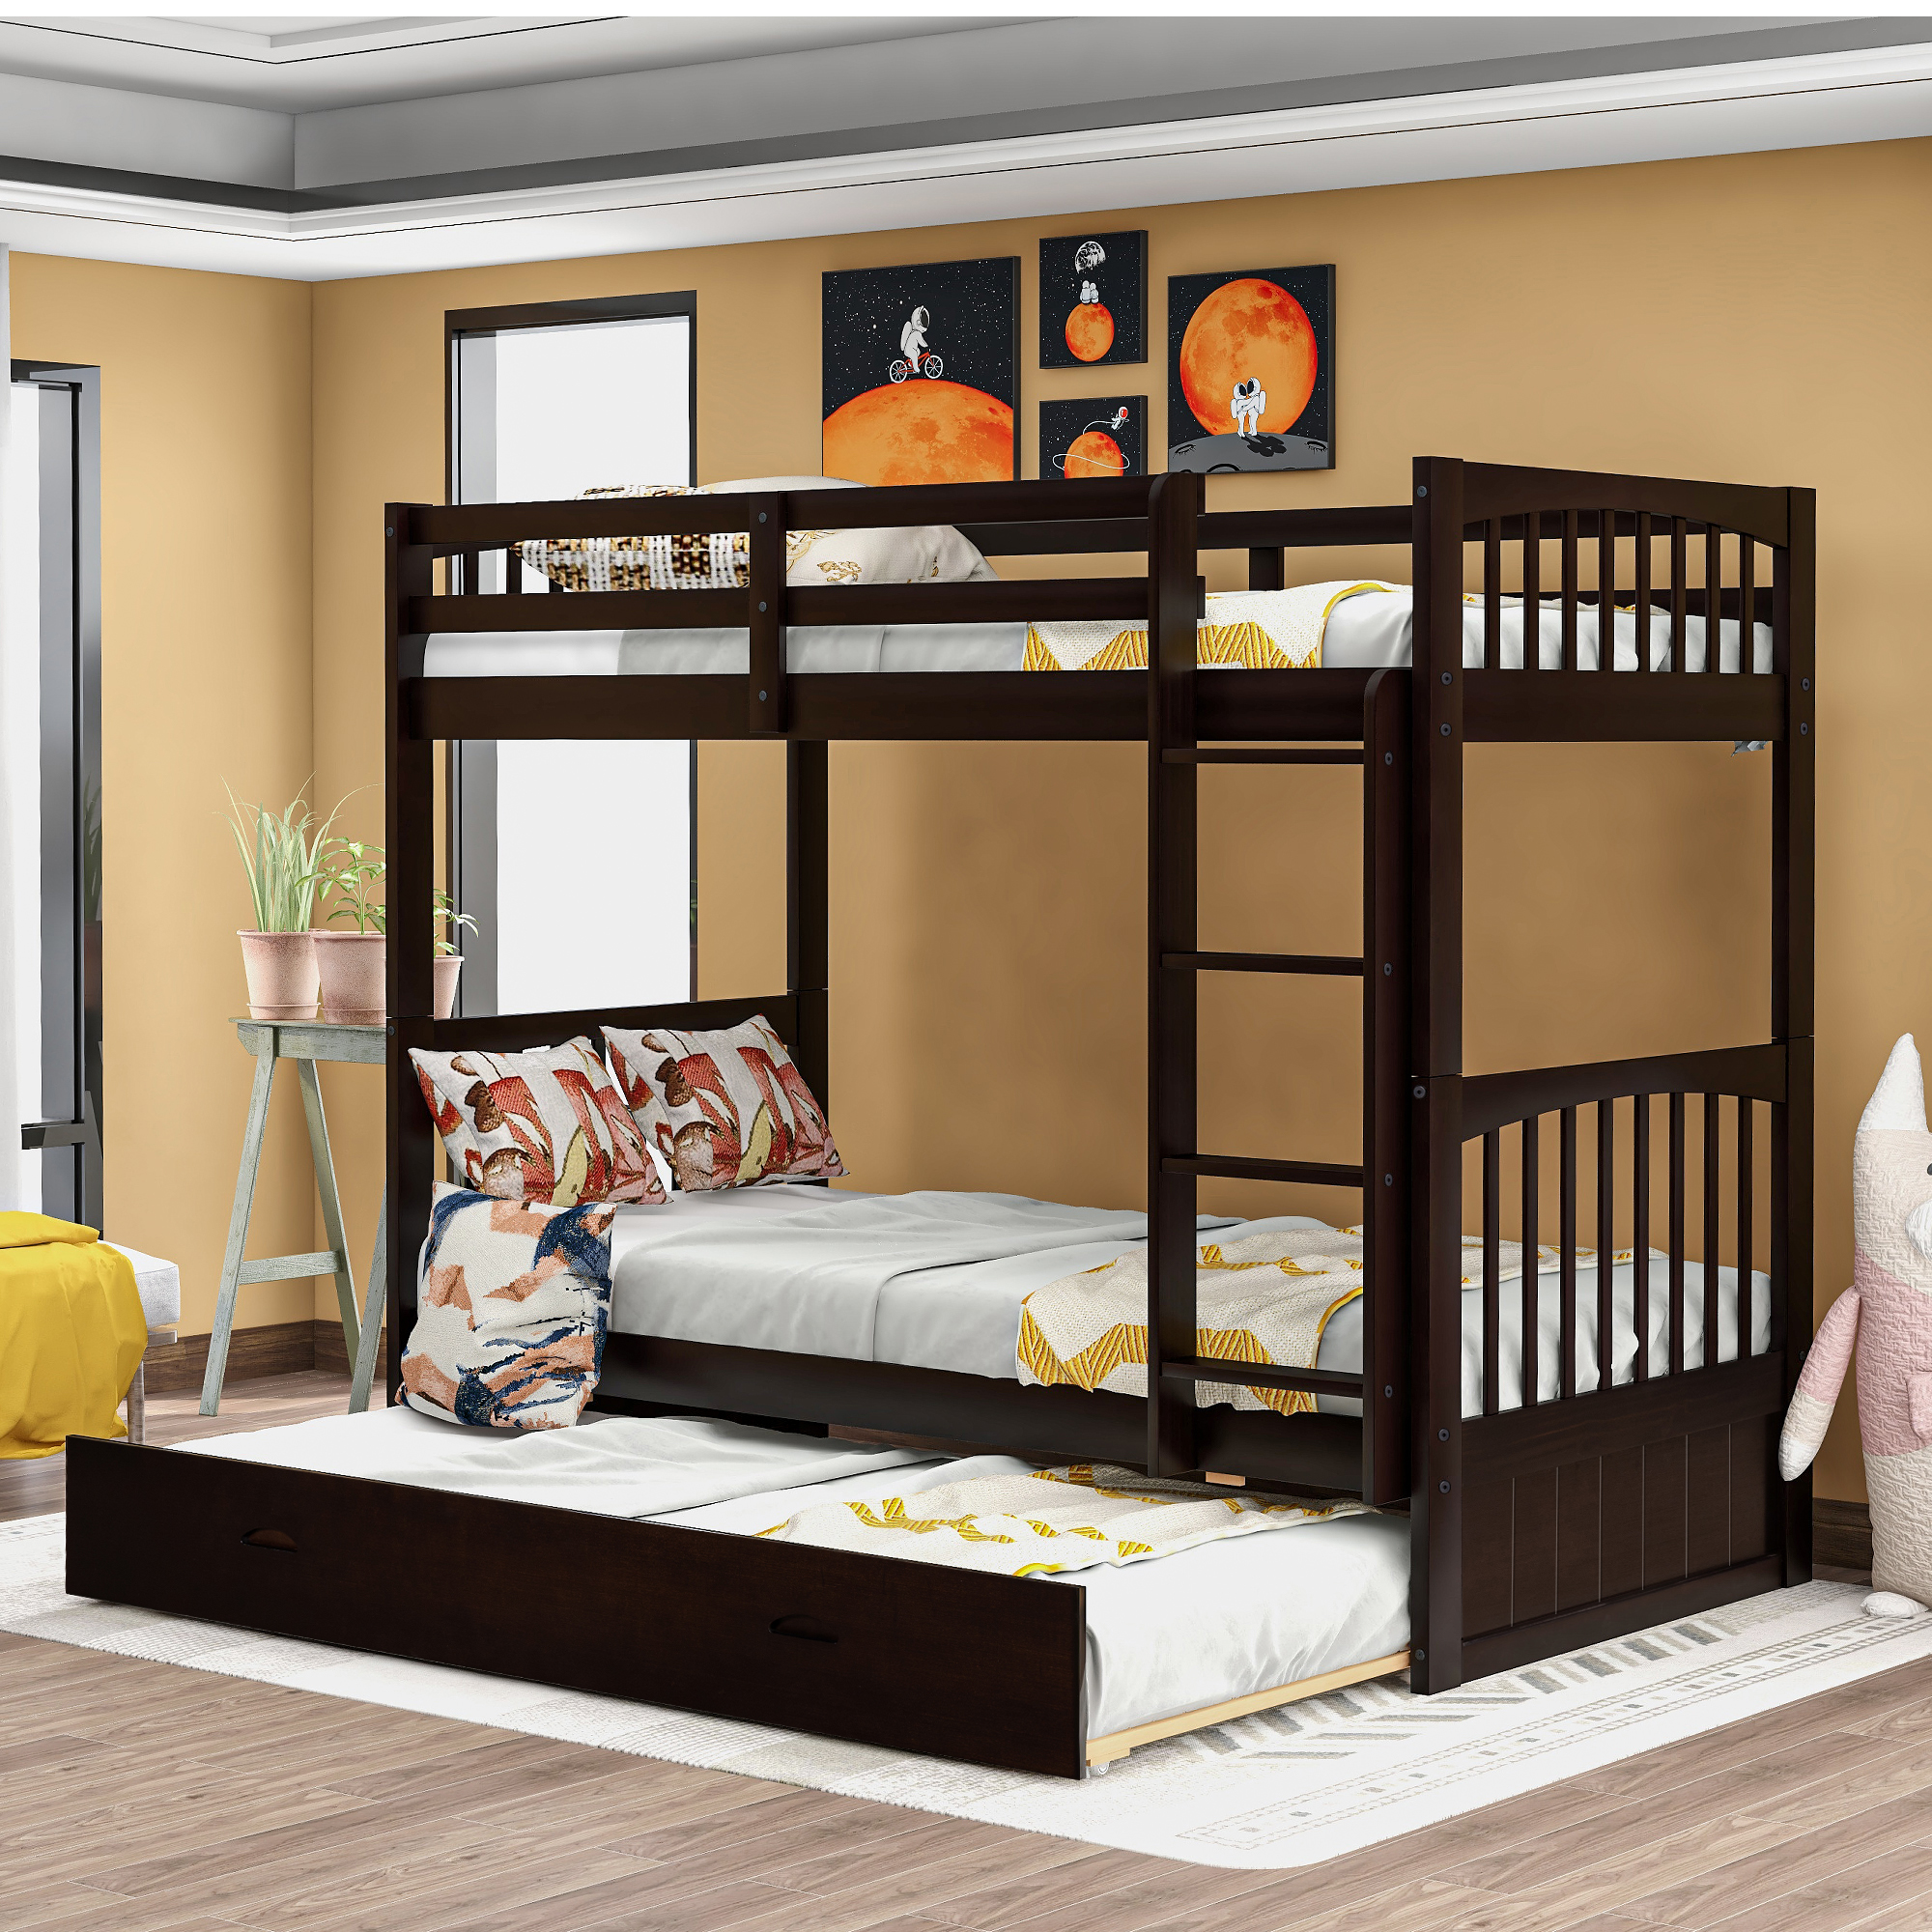 Merax Wood Bunk Bed Twin Over, Wood For Bunk Bed